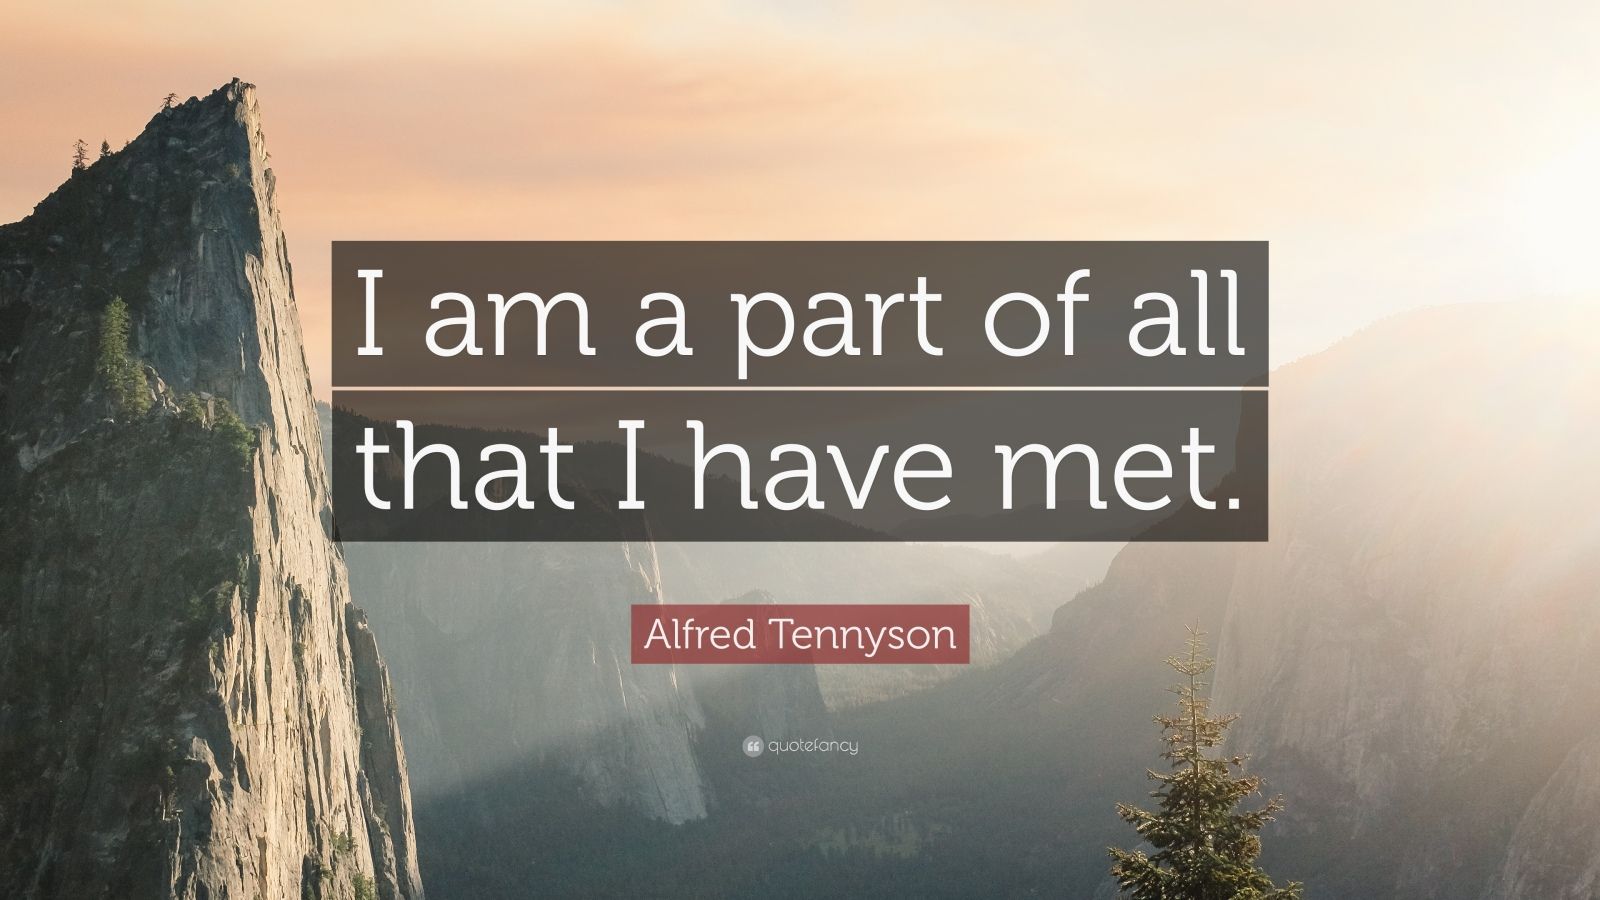 Top 380 Alfred Tennyson Quotes | 2021 Edition | Free Images - QuoteFancy